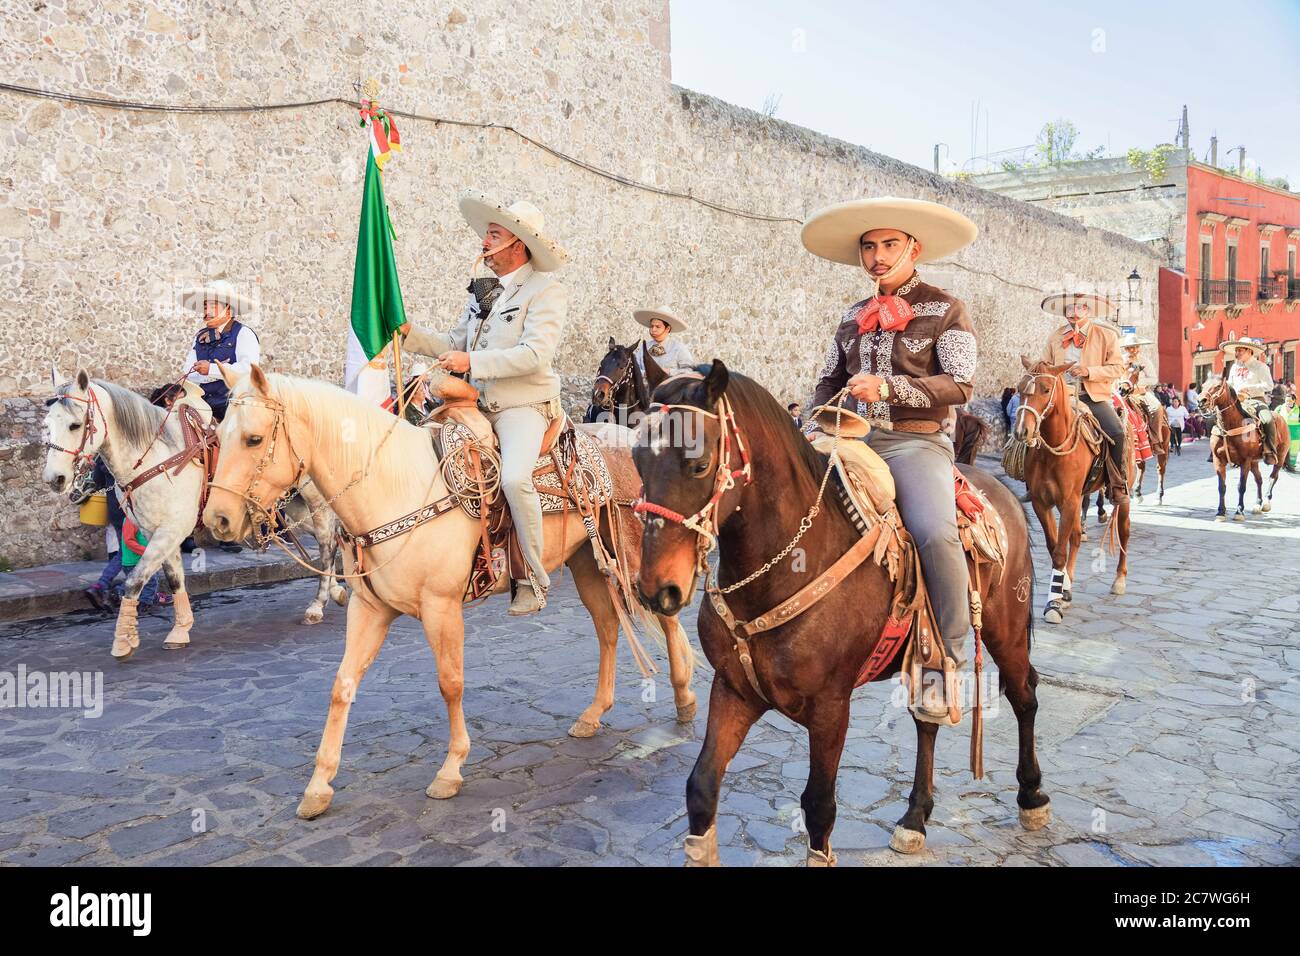 Mexican Cowboys ride their horses in a parade to celebrate the 251st birthday of the Mexican Independence hero Ignacio Allende January 21, 2020 in San Miguel de Allende, Guanajuato, Mexico. Allende, from a wealthy family in San Miguel played a major role in the independency war against Spain in 1810 and later honored by his home city by adding his name. Stock Photo